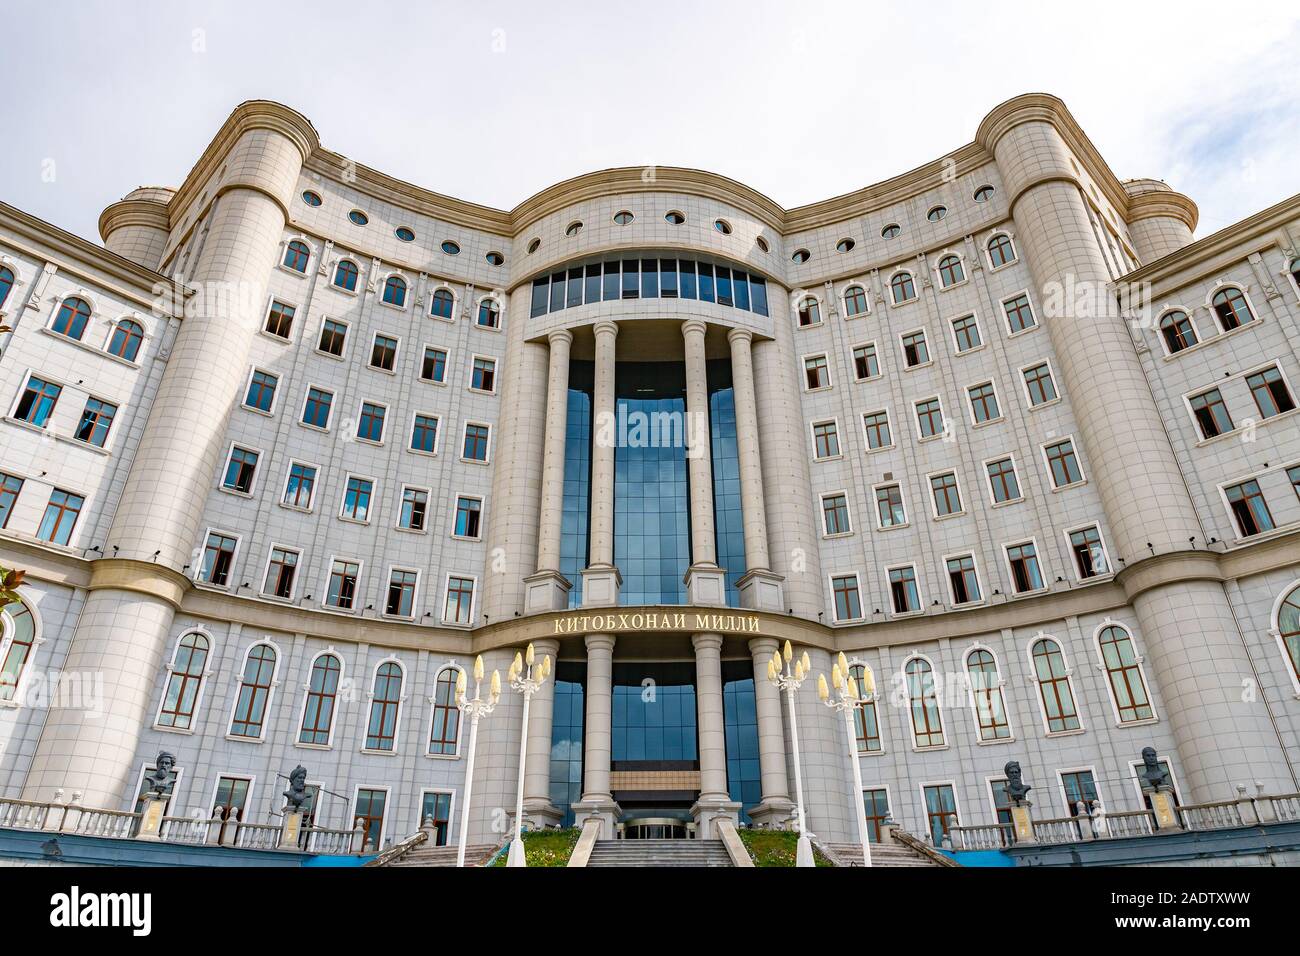 Dushanbe National Library Breathtaking Picturesque View on a Sunny Blue Sky Day Stock Photo